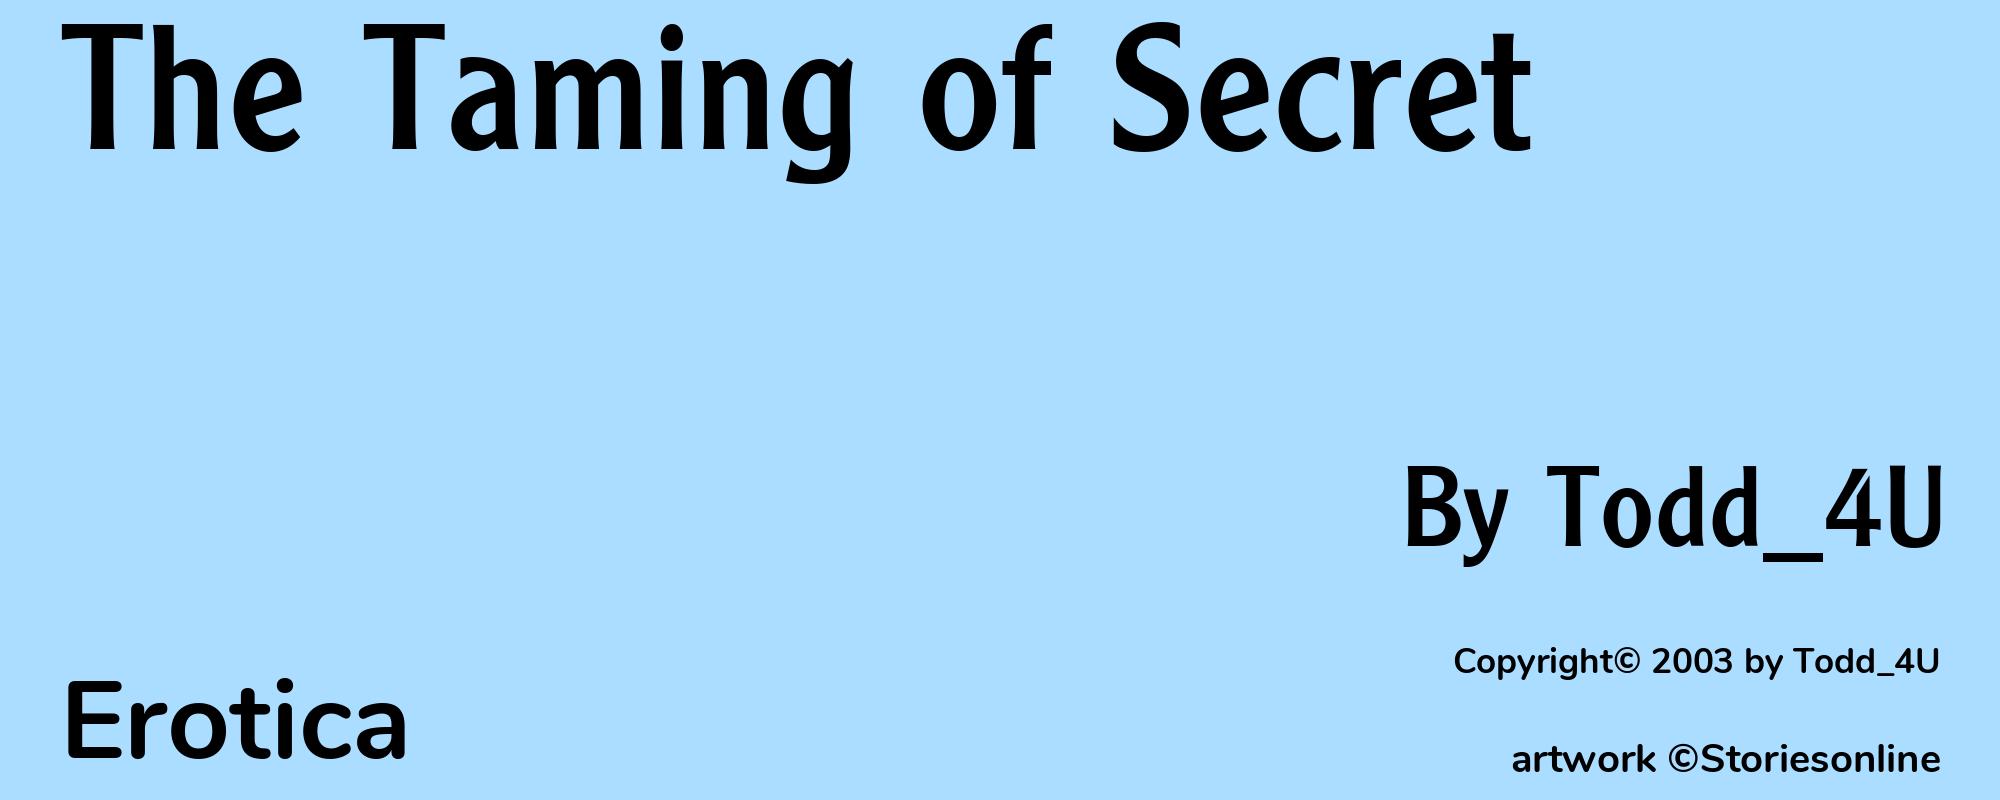 The Taming of Secret - Cover